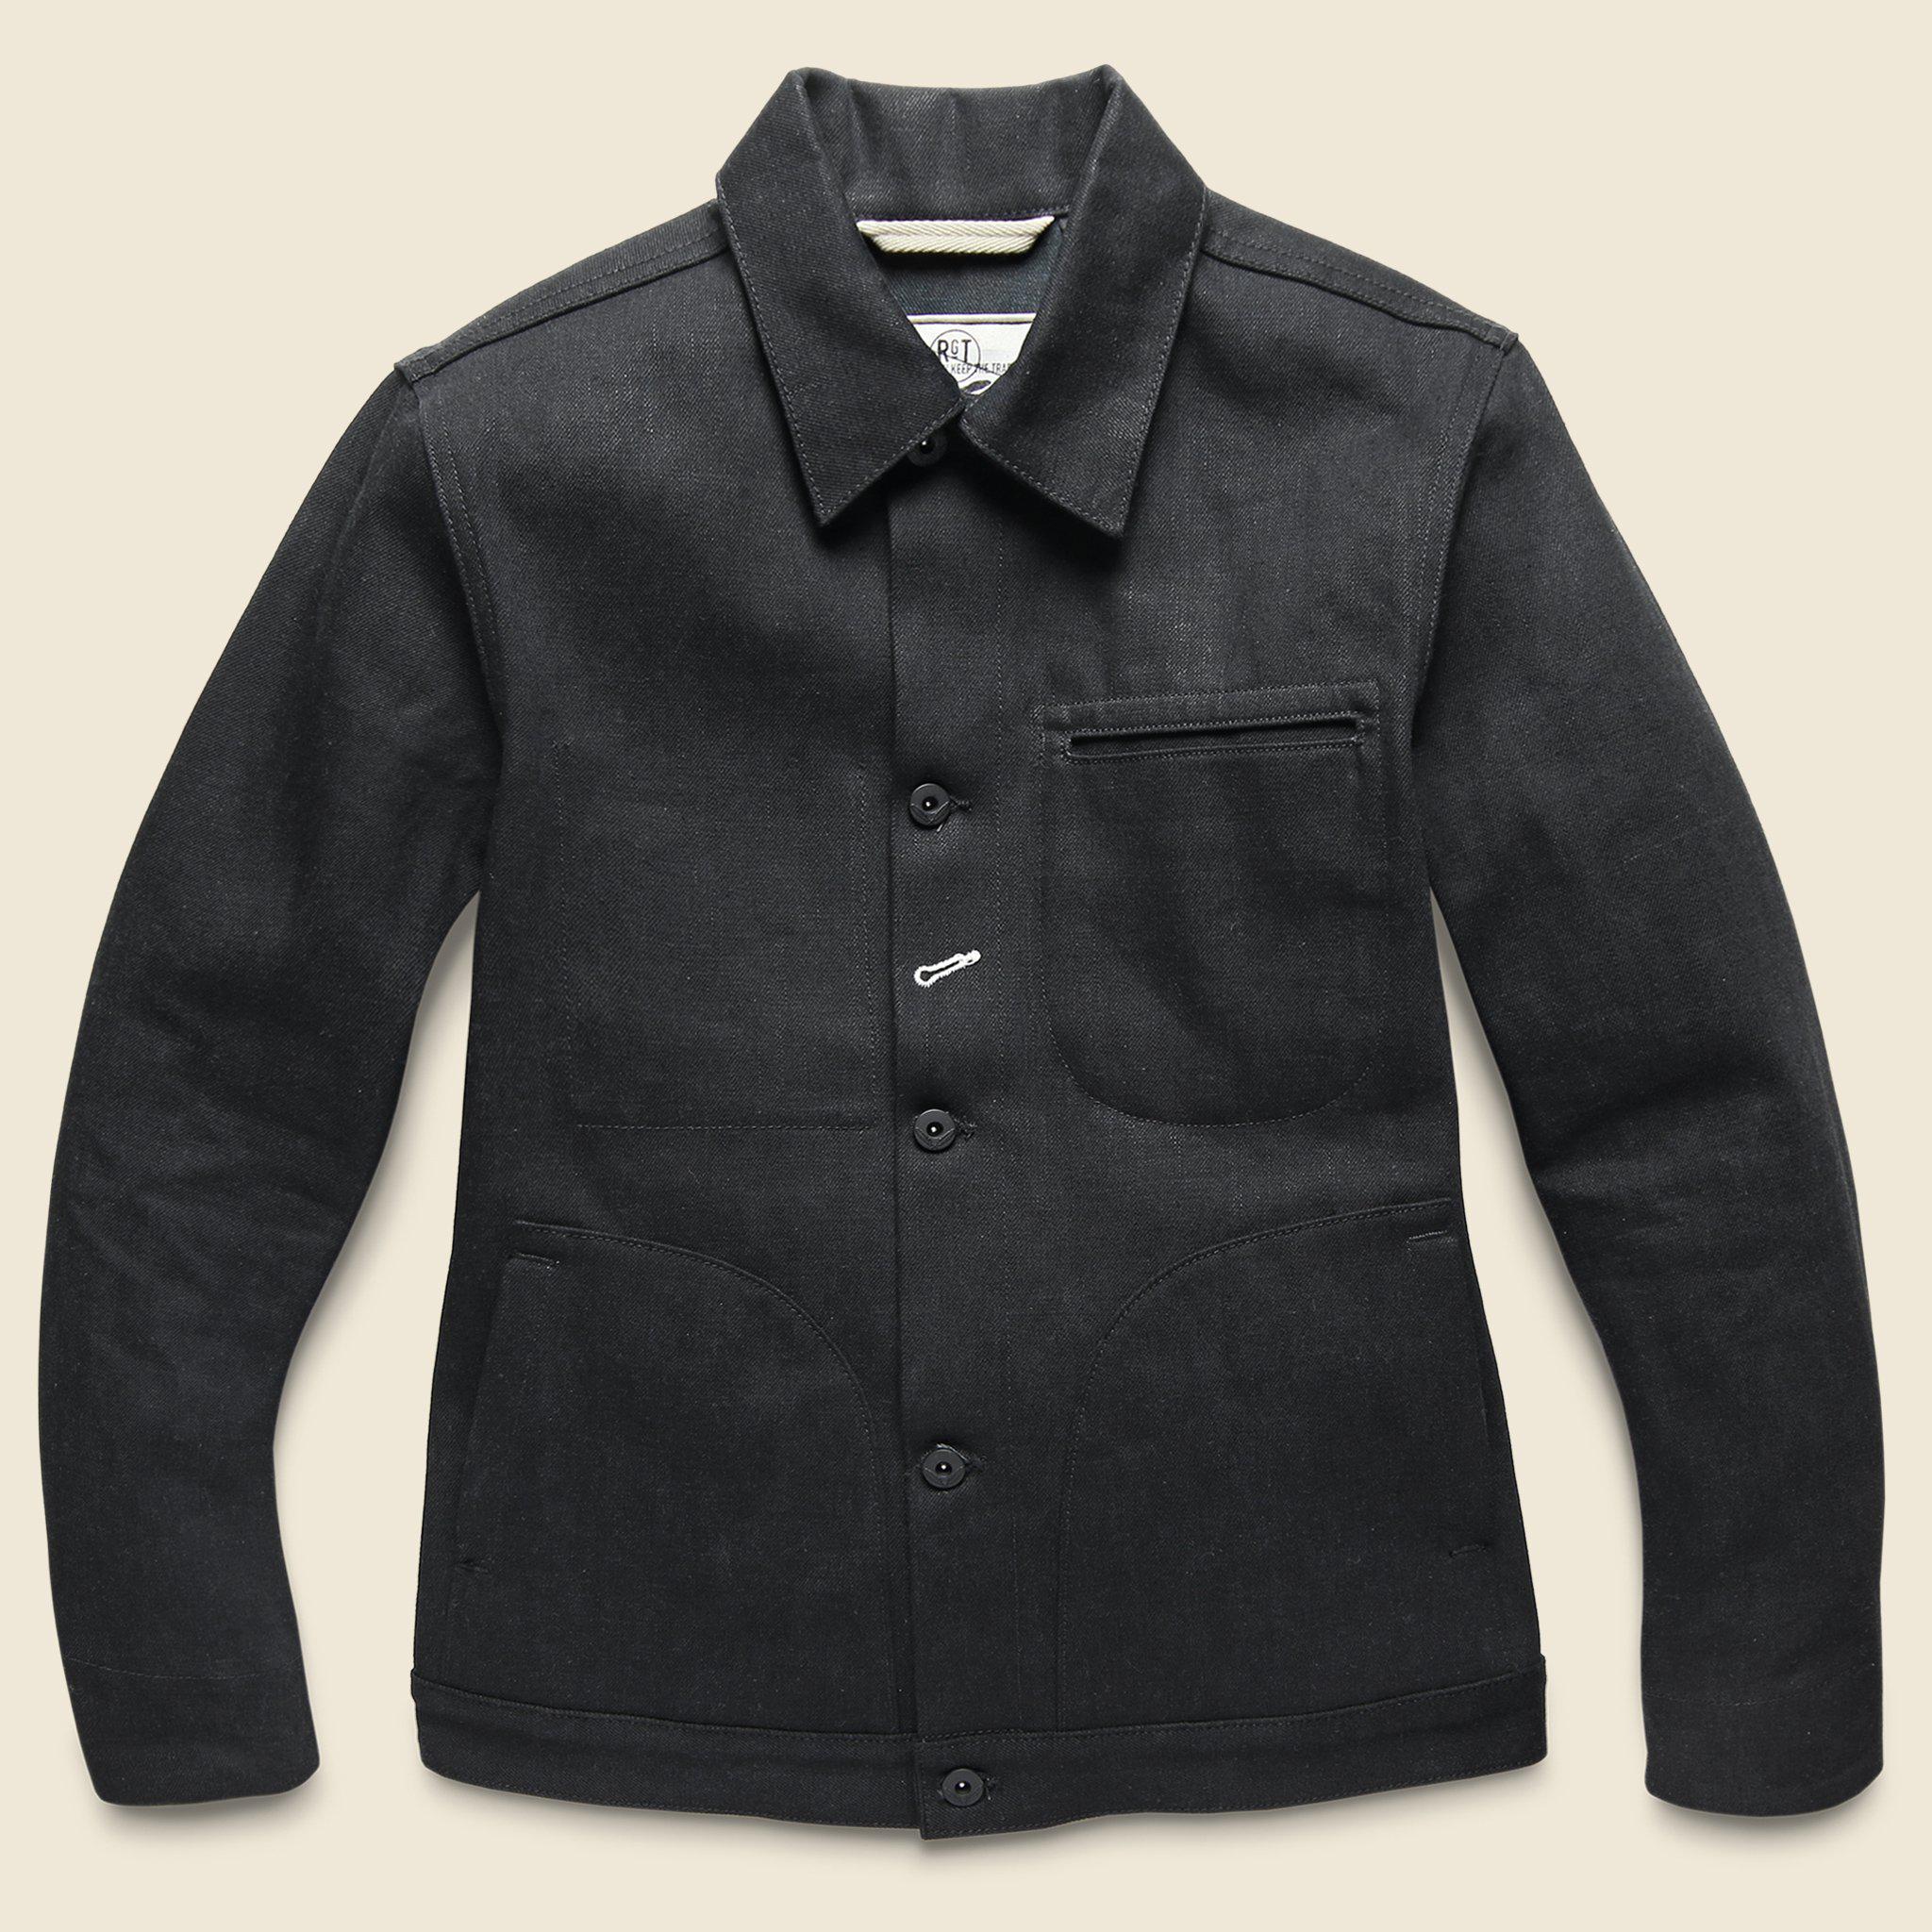 Rogue Territory Denim Supply Jacket - Stealth Black for Men - Lyst